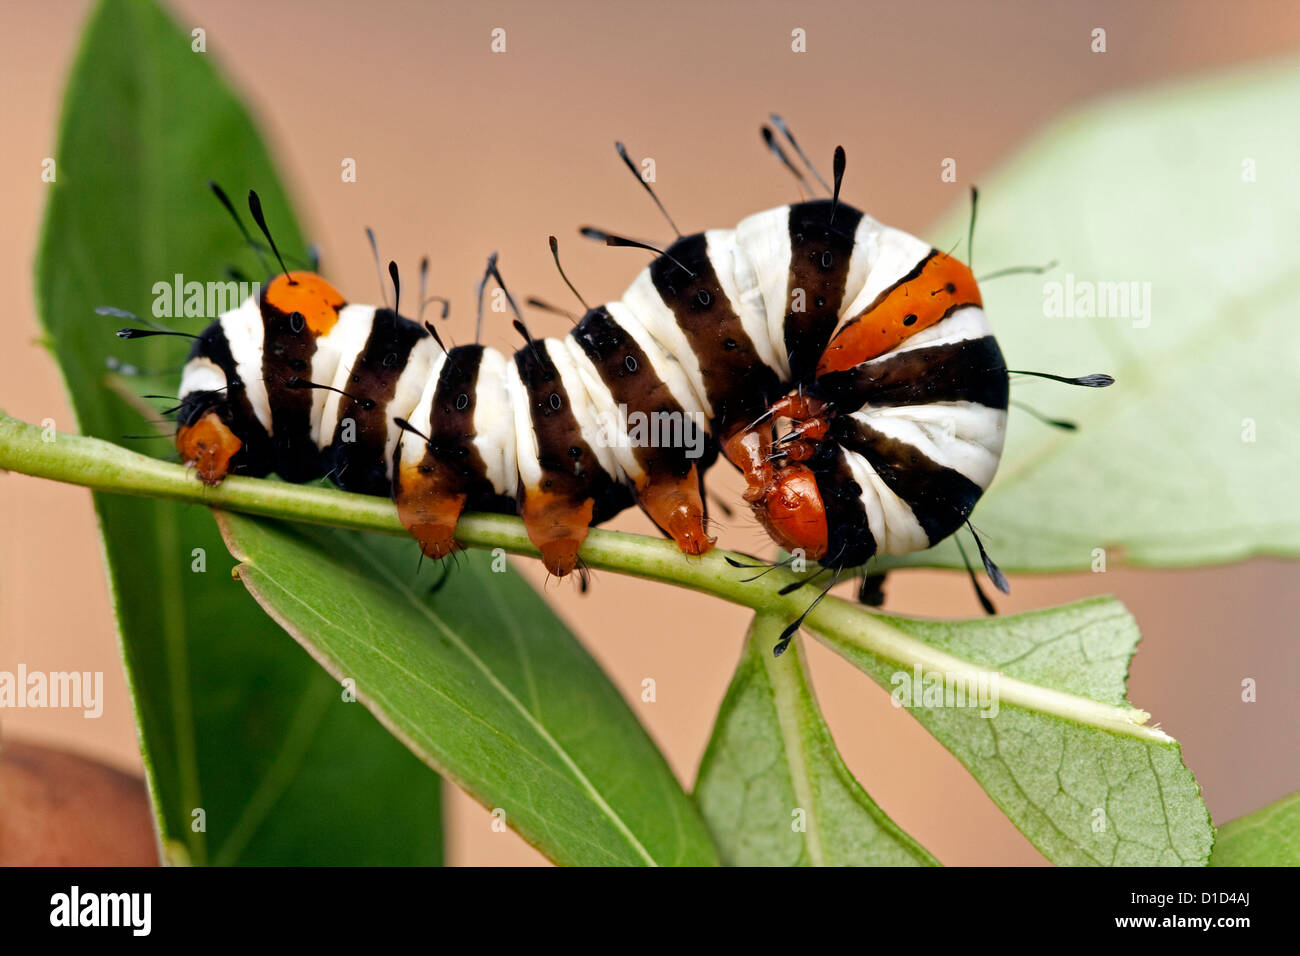 Australian Caterpillar High Resolution Stock Photography And Images Alamy